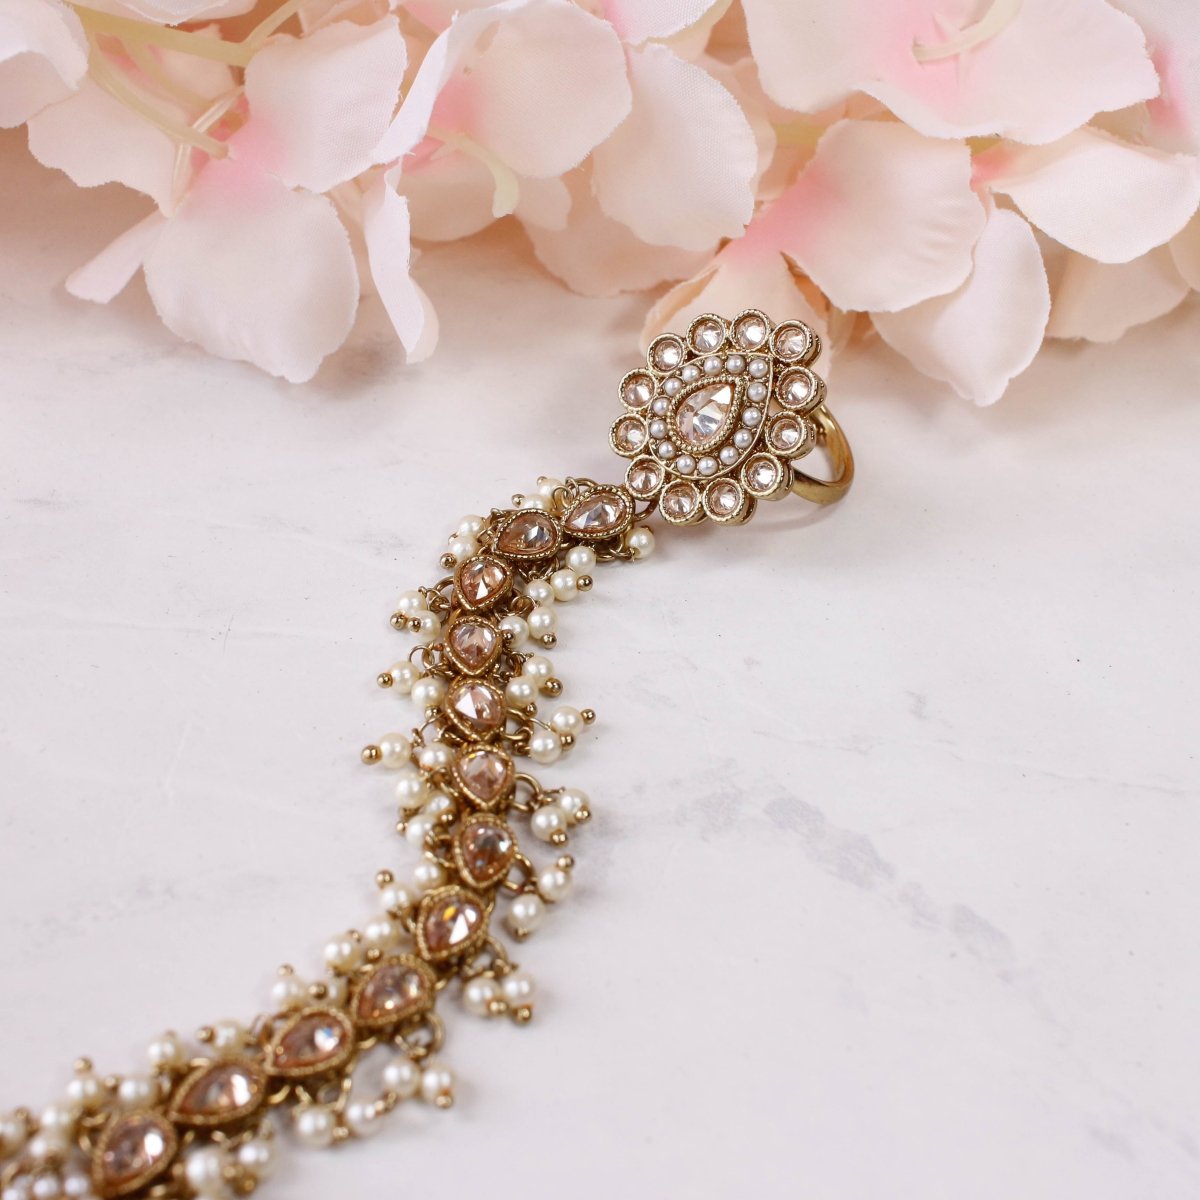 Statement Pearl Droplet Hand Harness - Champagne - SOKORA JEWELSStatement Pearl Droplet Hand Harness - Champagne